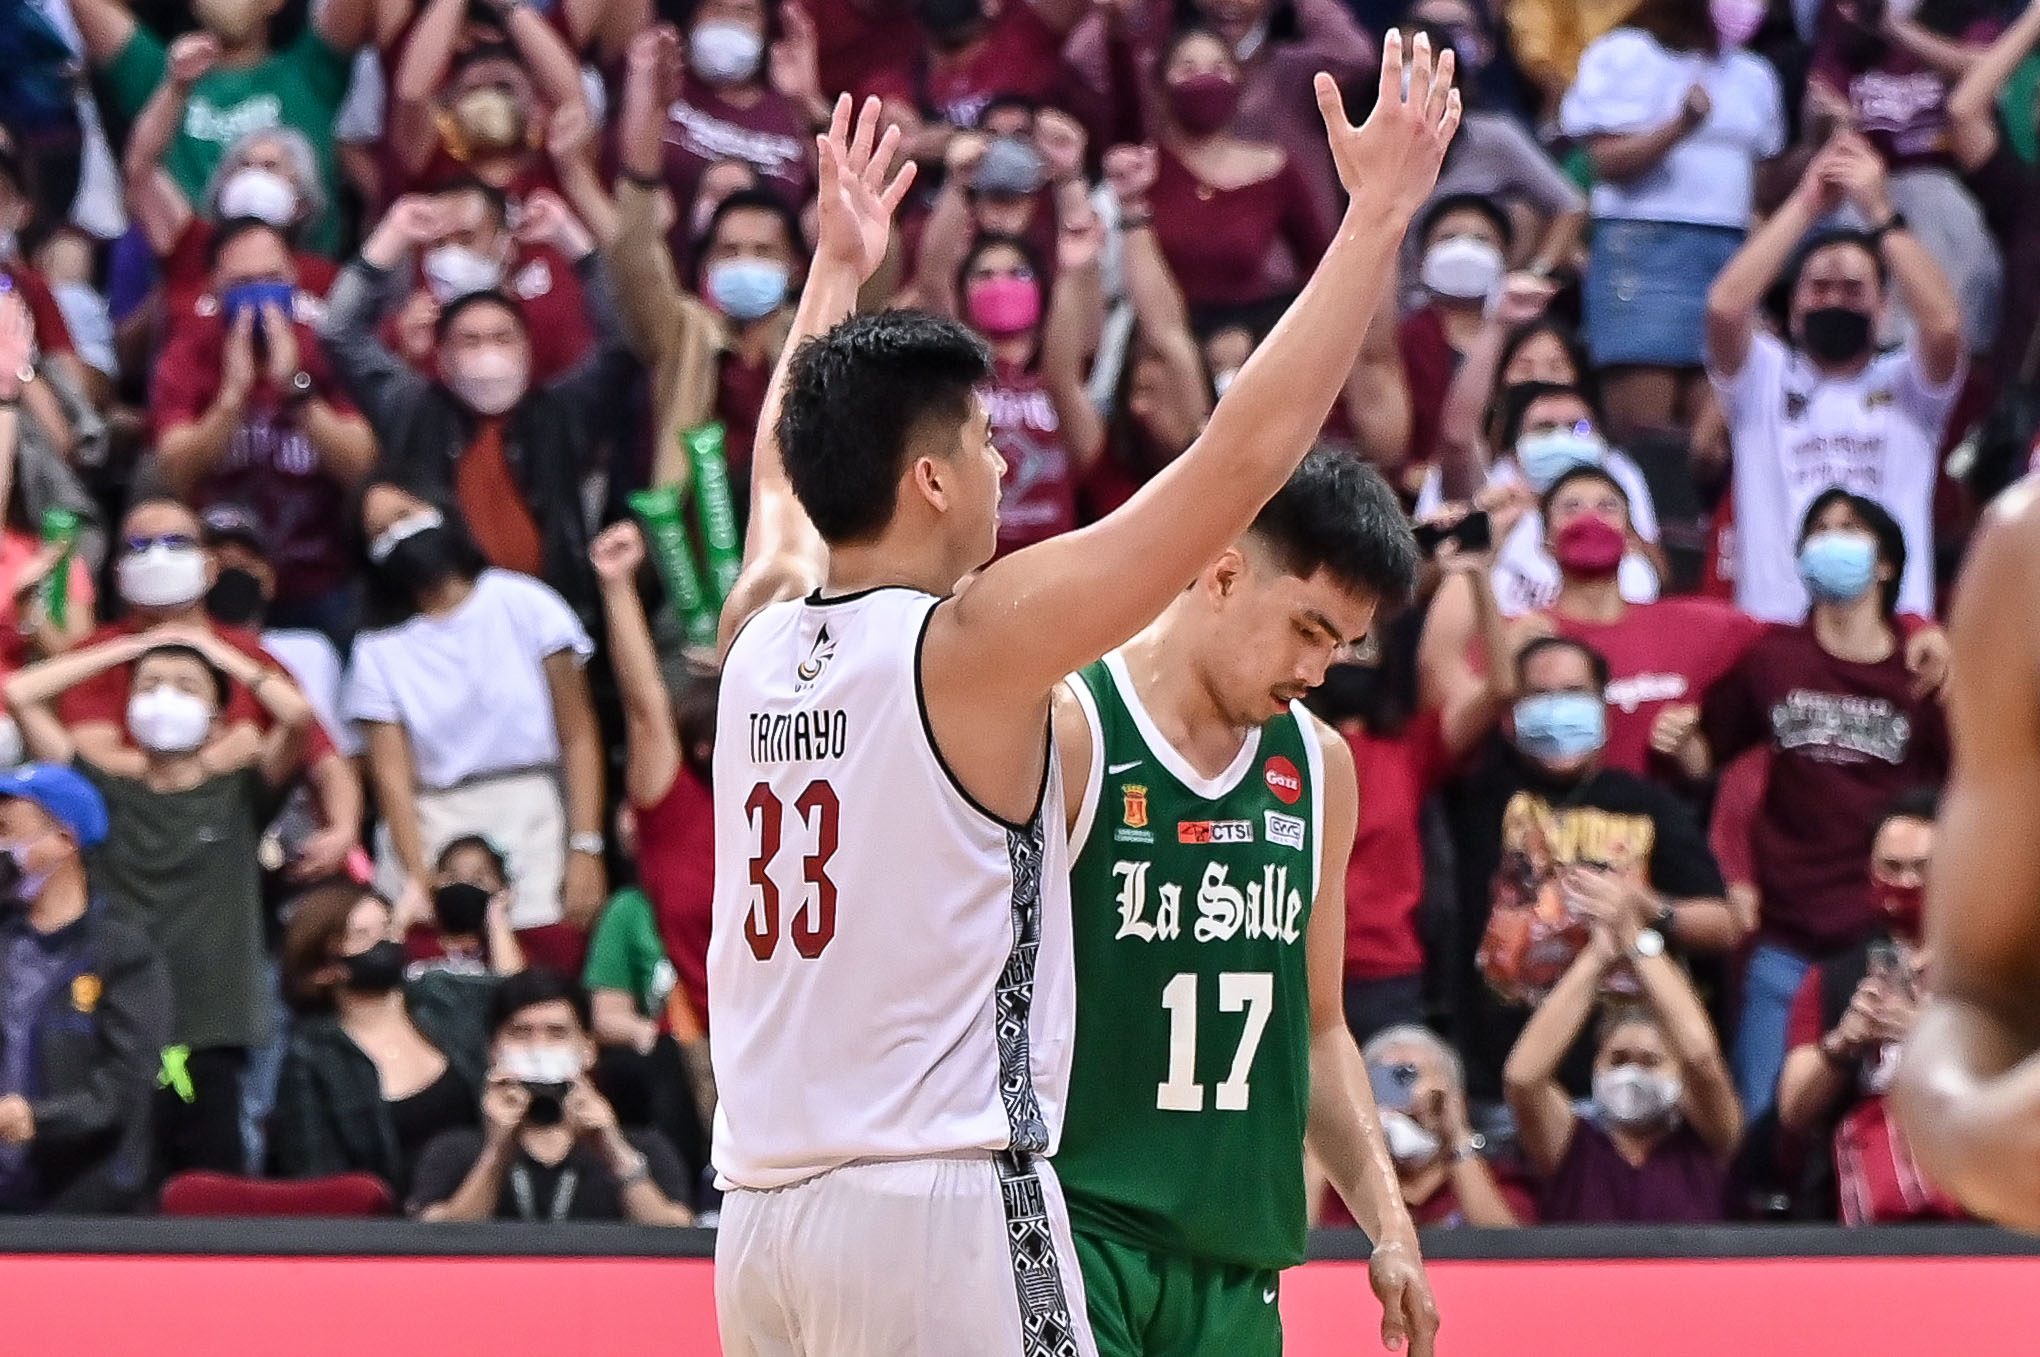 Quiambao determined to shake off jitters after forgettable UAAP seniors debut